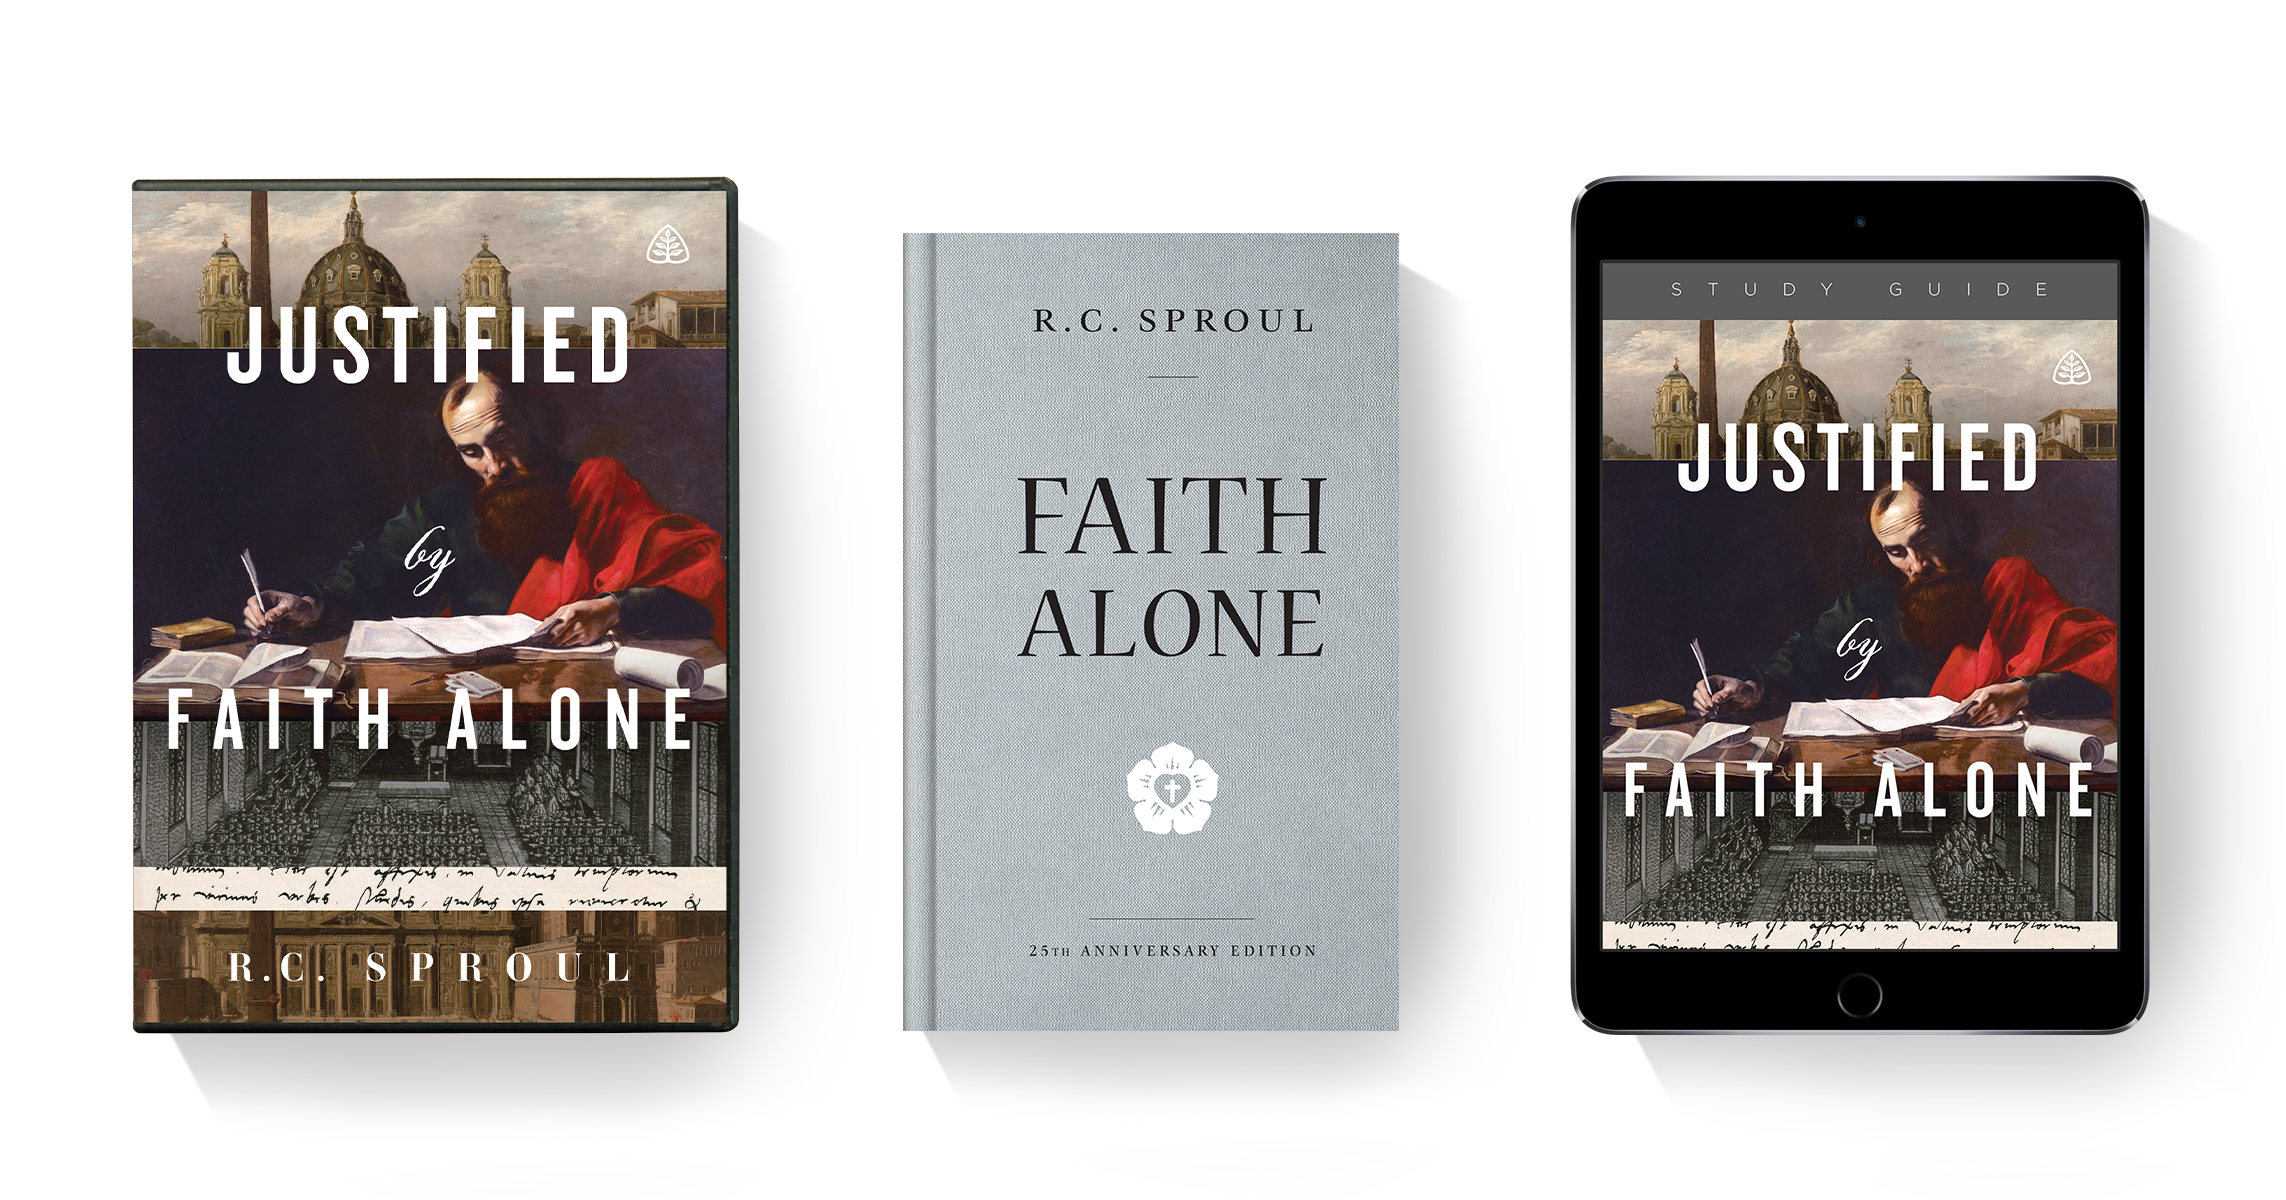 Justified by Faith Alone DVD and Digital Study Guide + Faith Alone Book